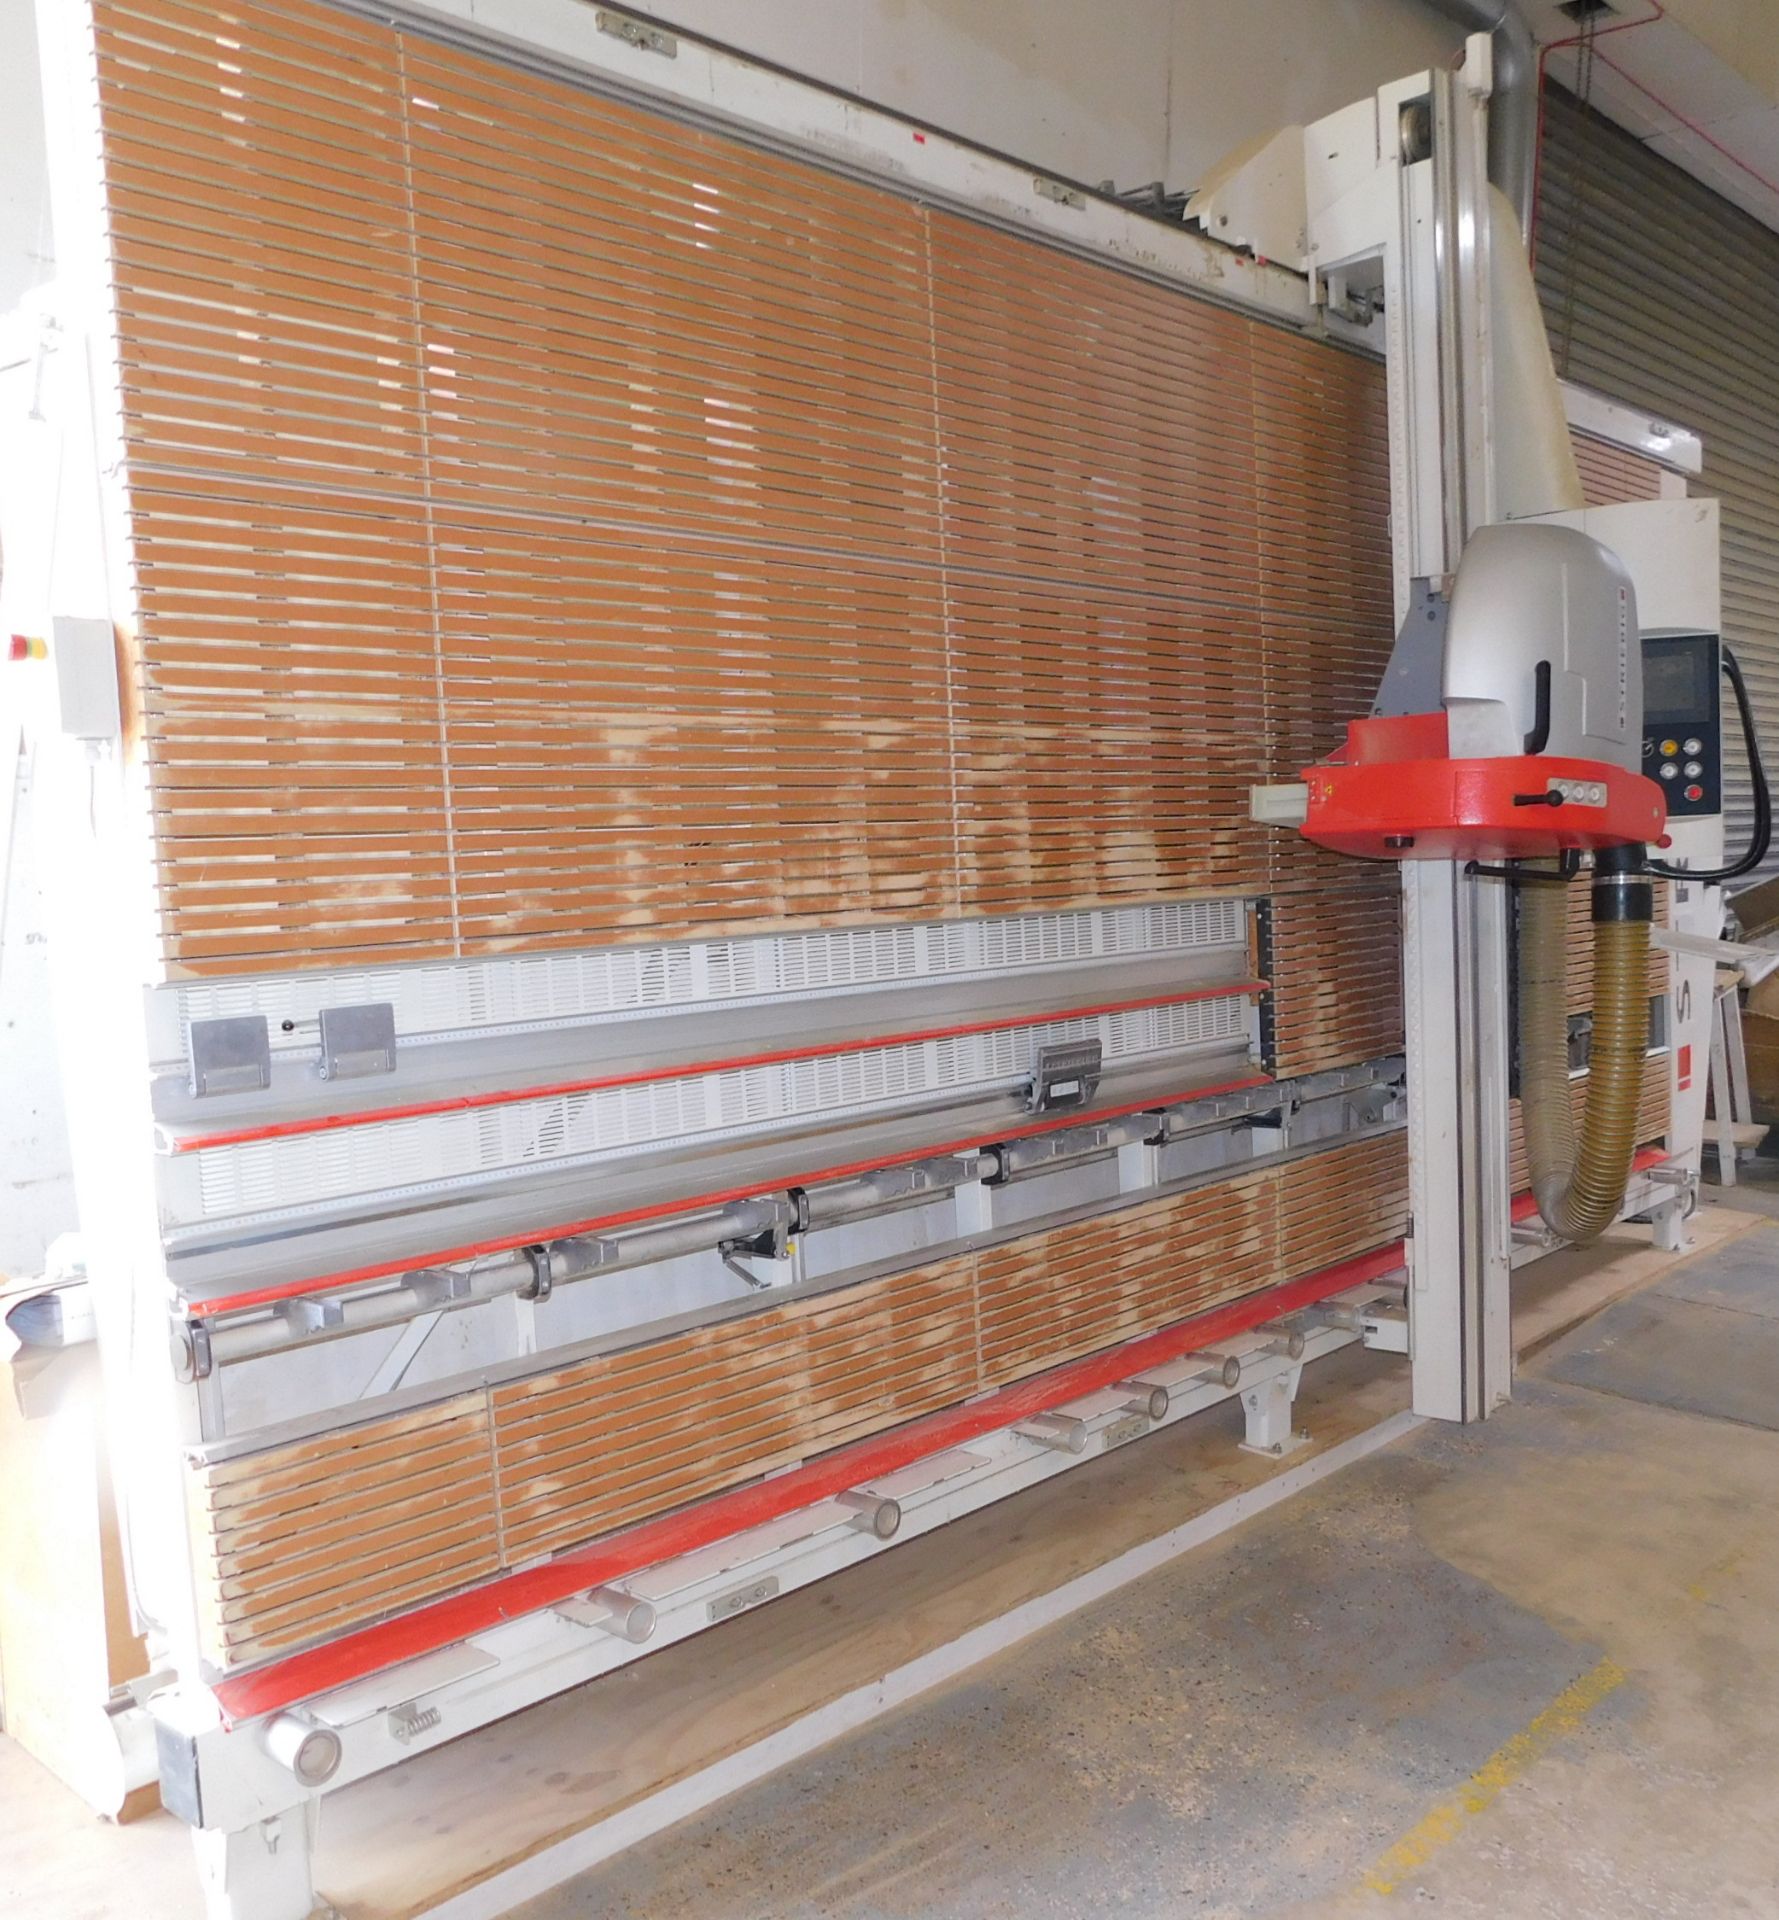 Striebig 5224 Vertical Panel Saw with Control 09 Vertical Head (2017), Scoring Saw Unit VSA; 240mm - Image 6 of 8